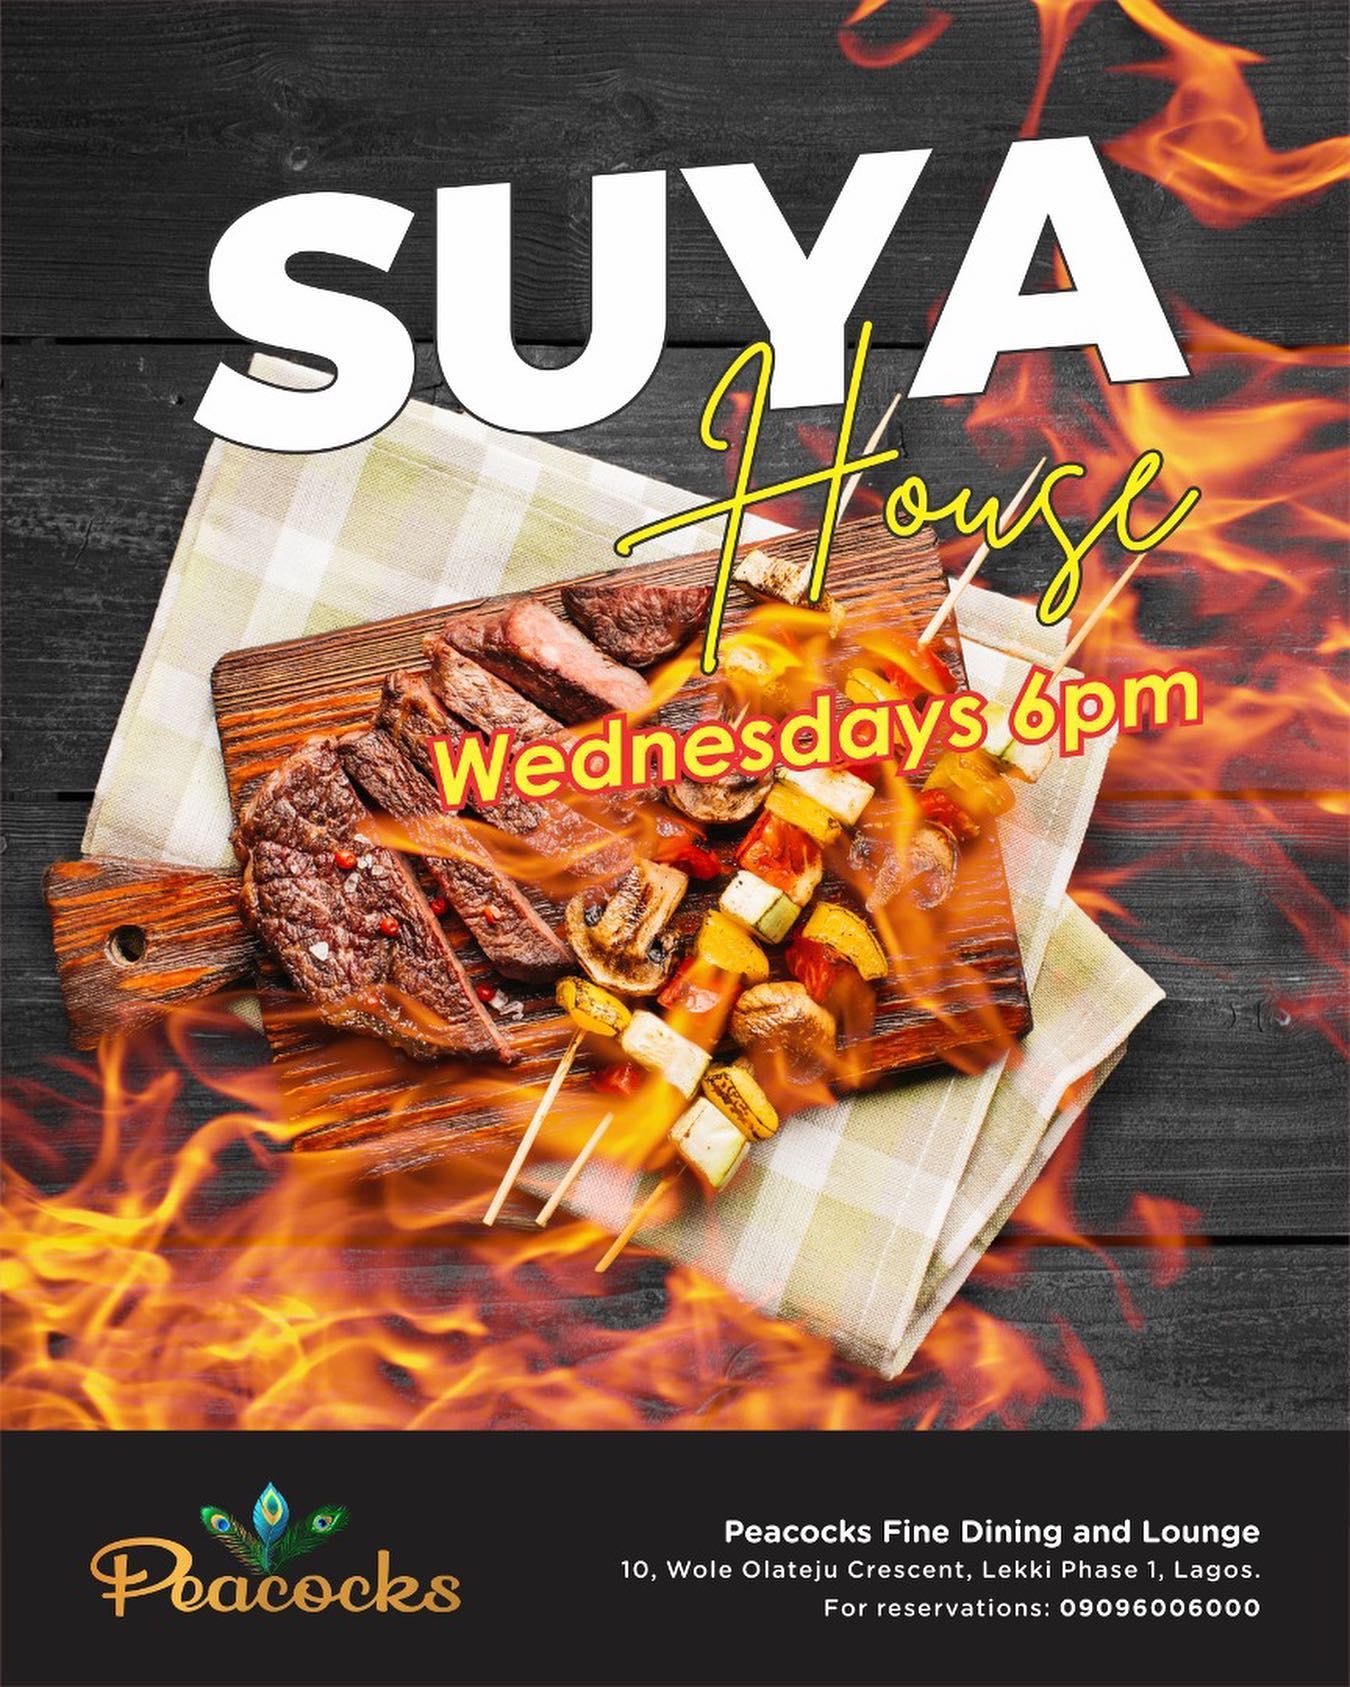 Suya House; Wednesday nights at Peacock are all about Suya! Come enjoy amazing cocktails and suya at Peacock Lagos every Wednesday from 6 pm.